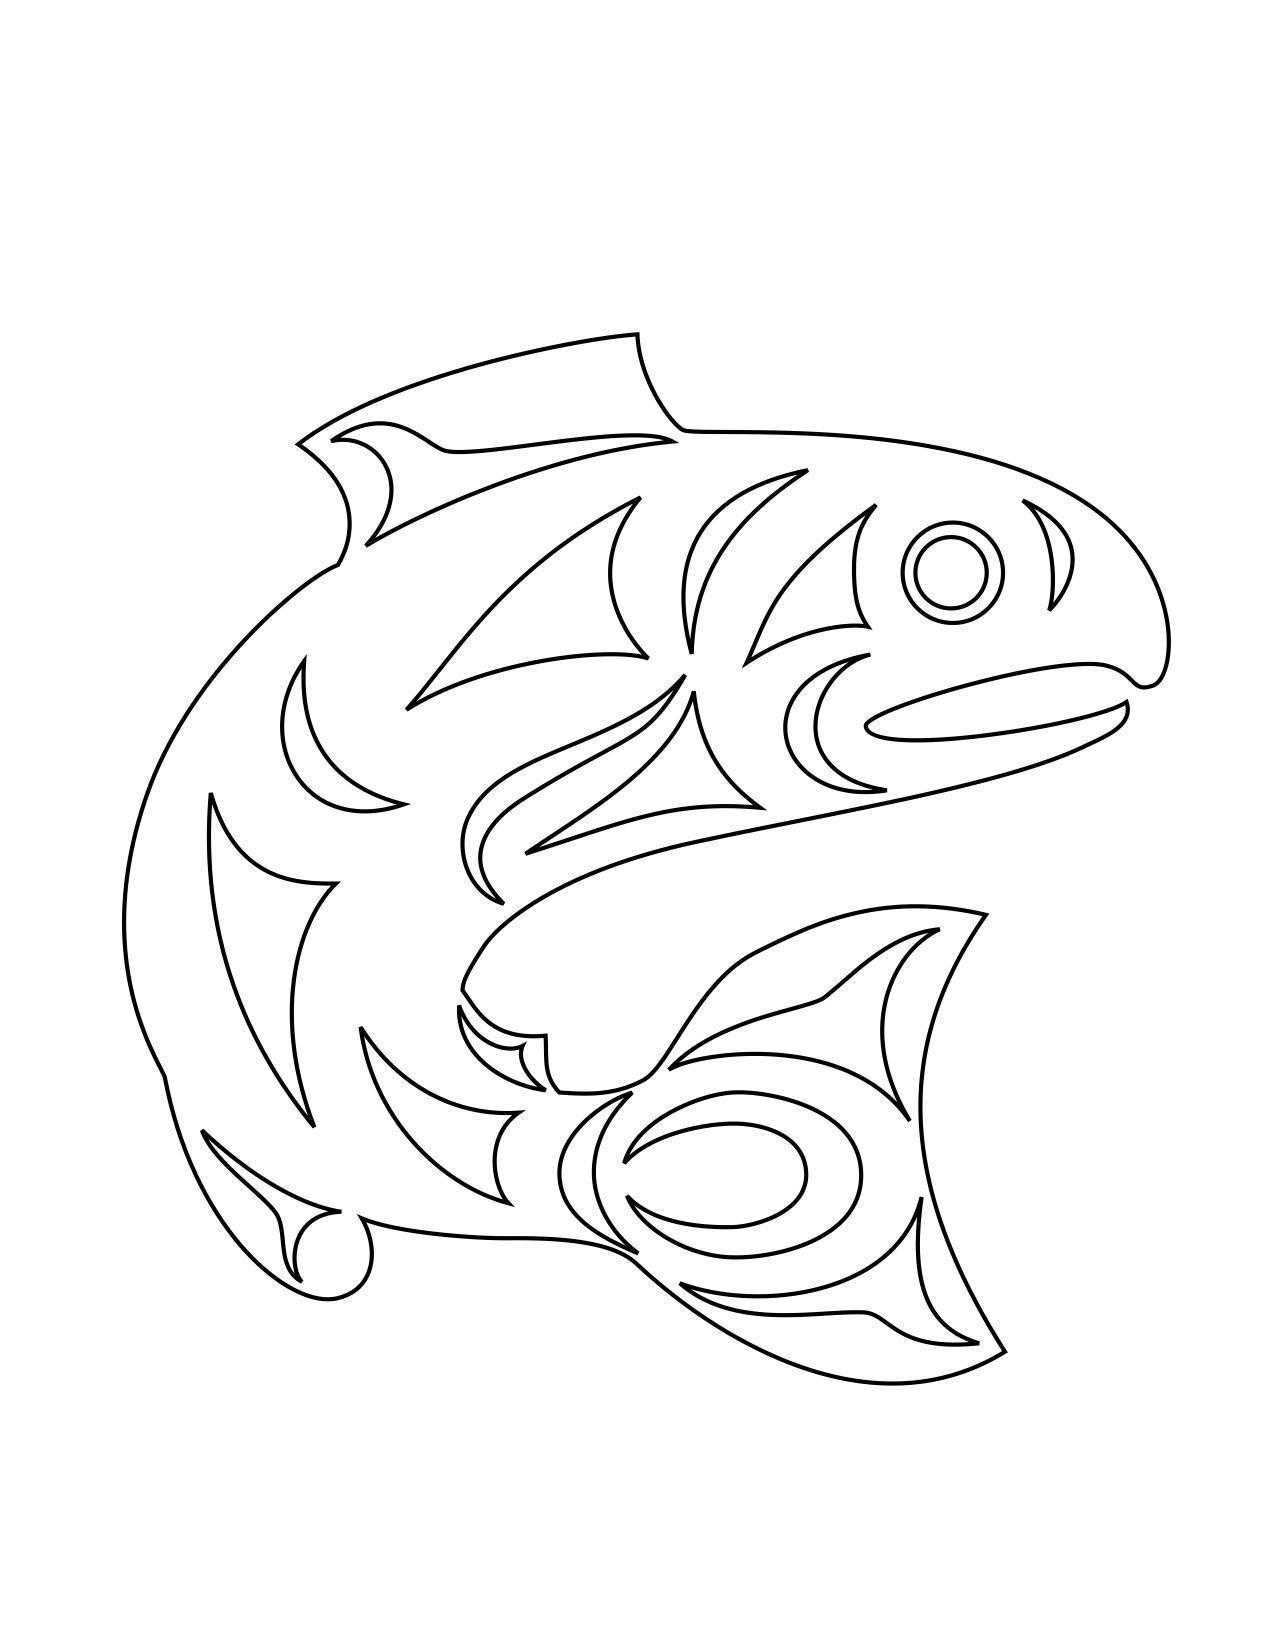 Coloring Fish. Category Animals. Tags:  fish.